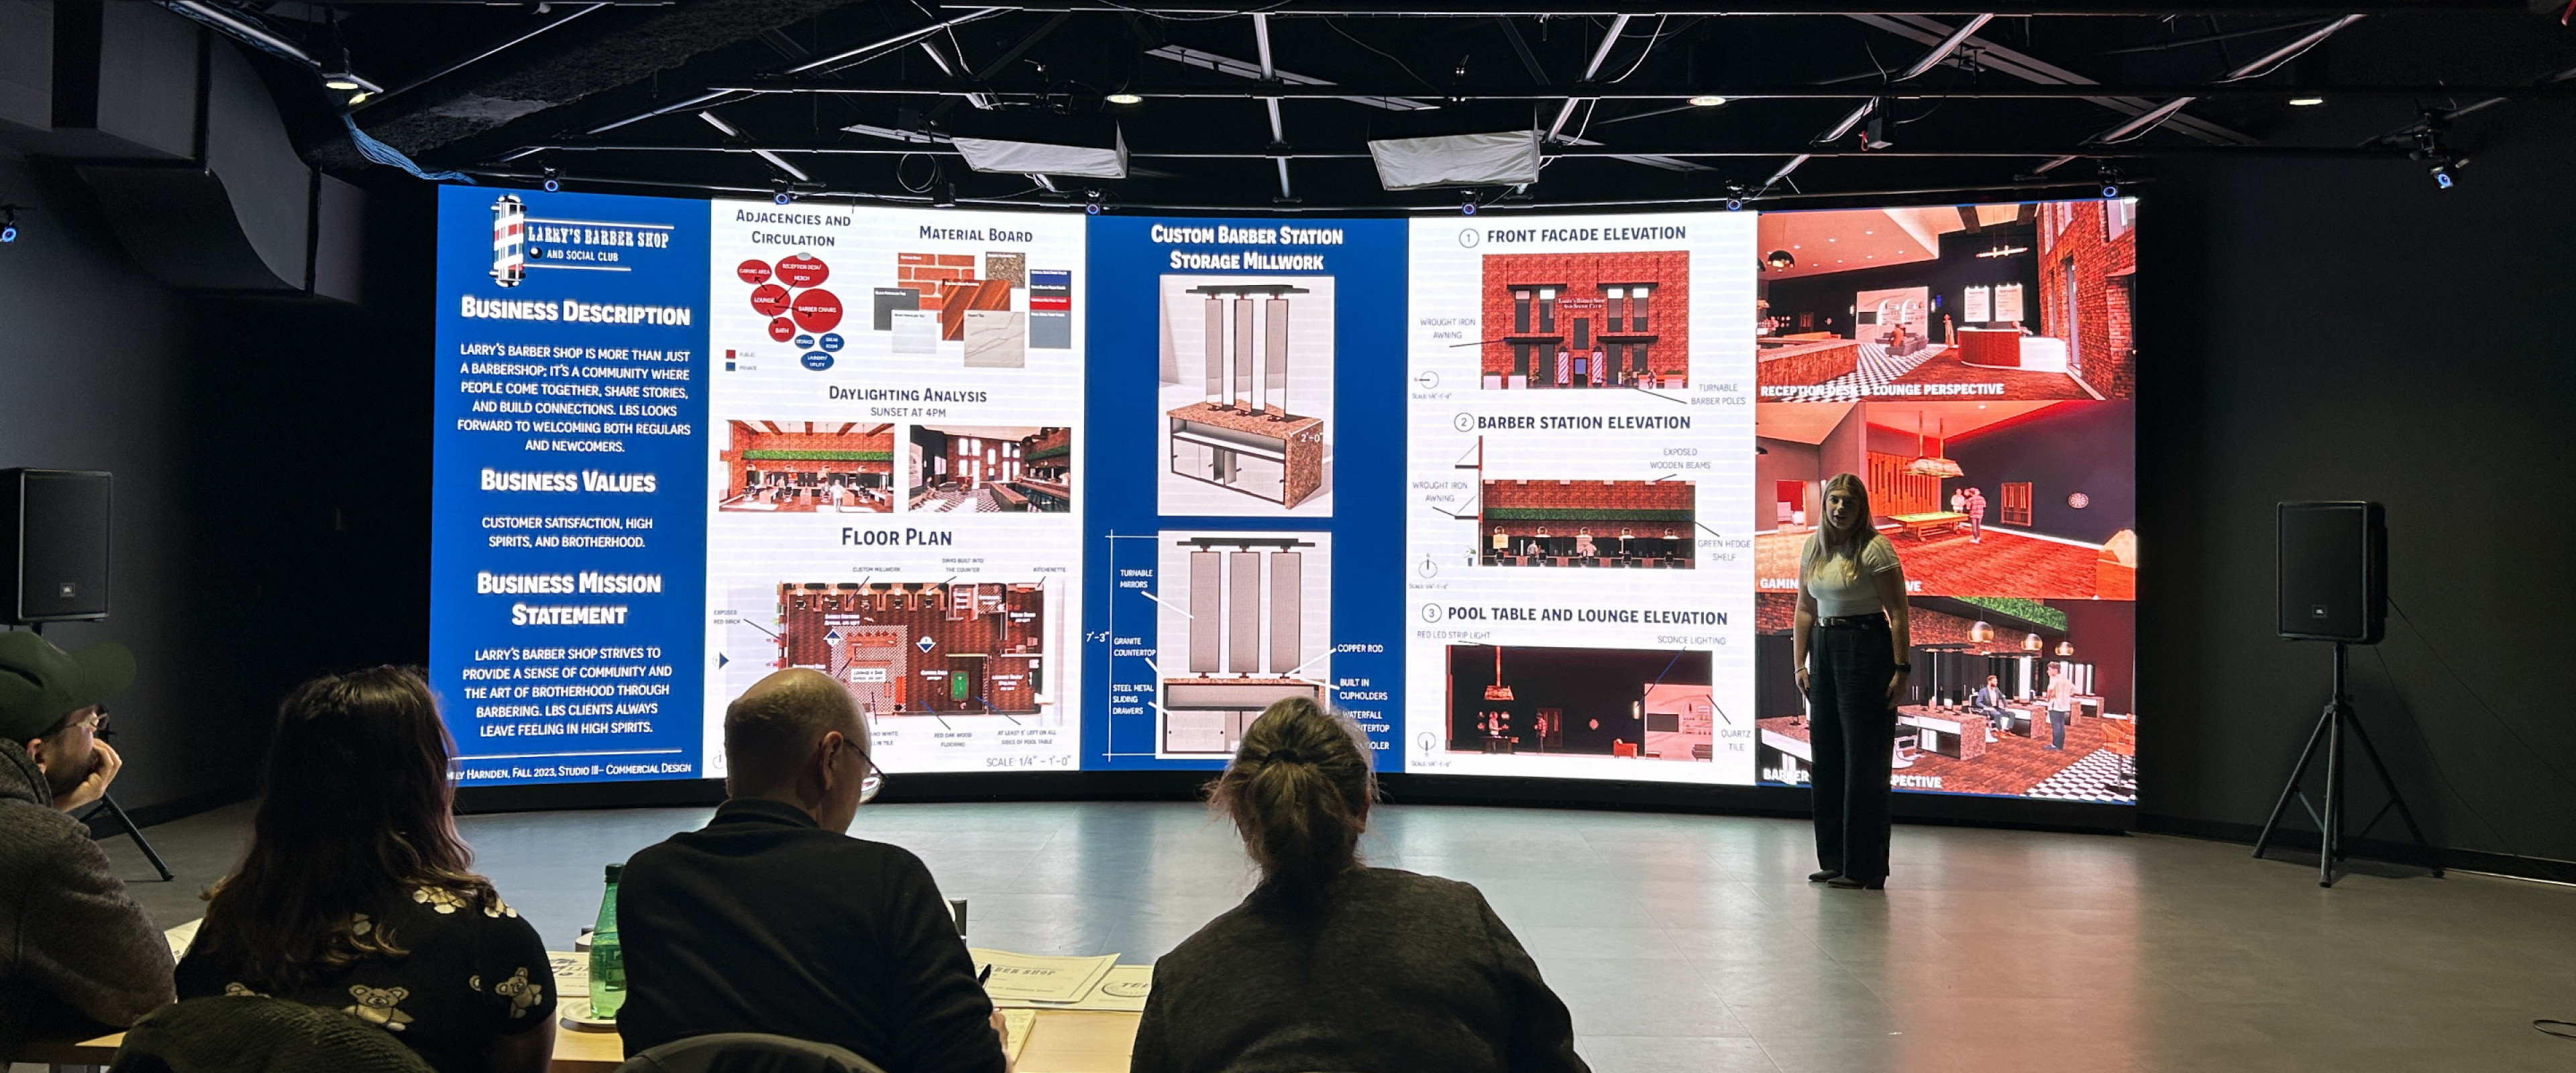 Interior designer showcases proposal on LED wall. Observers shown seated at tables for the presentation.